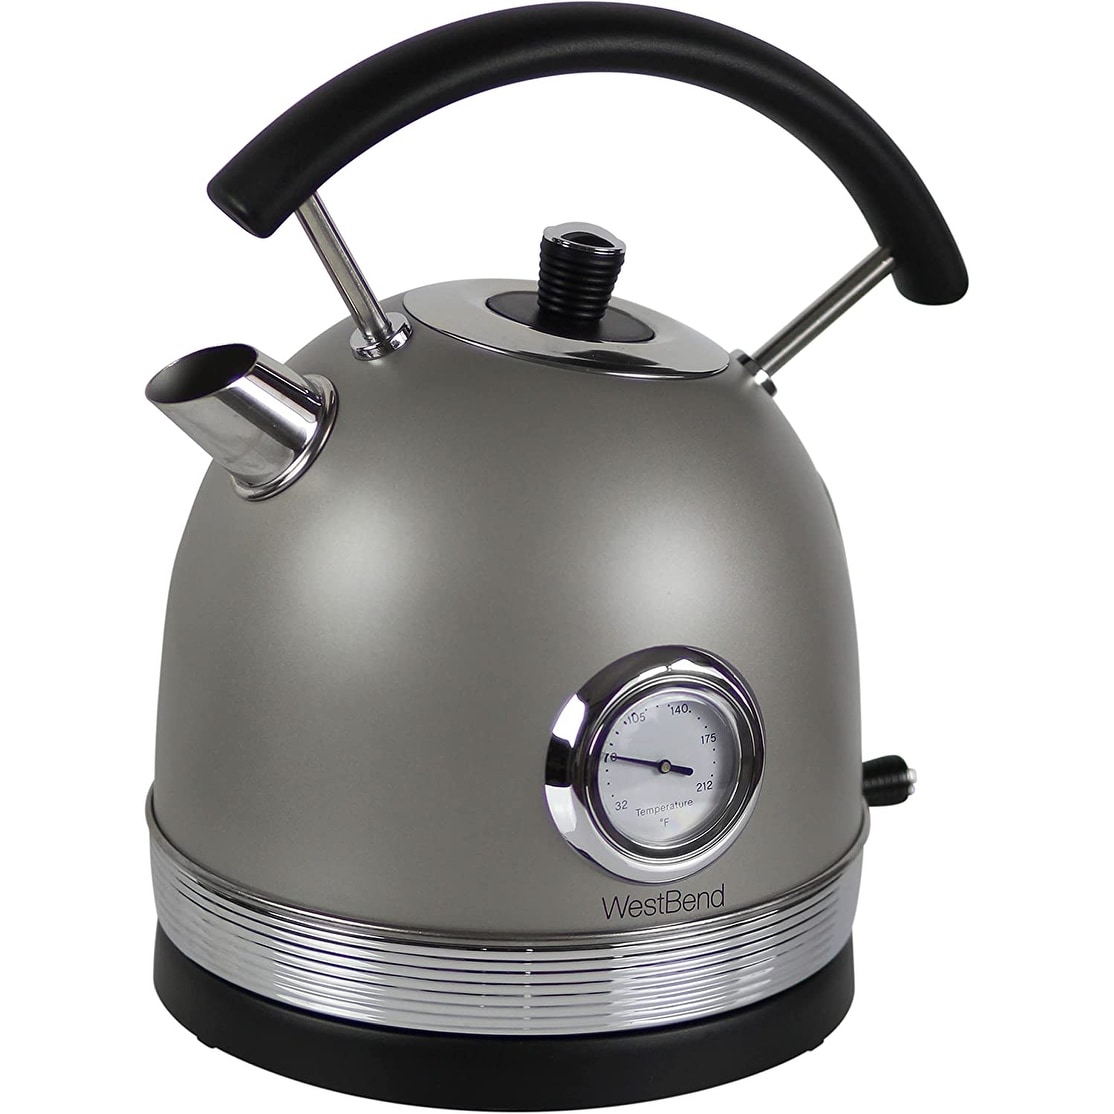 https://ak1.ostkcdn.com/images/products/is/images/direct/6706d6fac142da07b2016a162e61512c67fae371/West-Bend-Electric-Kettle-Retro-Styled-Stainless-Steel-1500-Watts-with.jpg